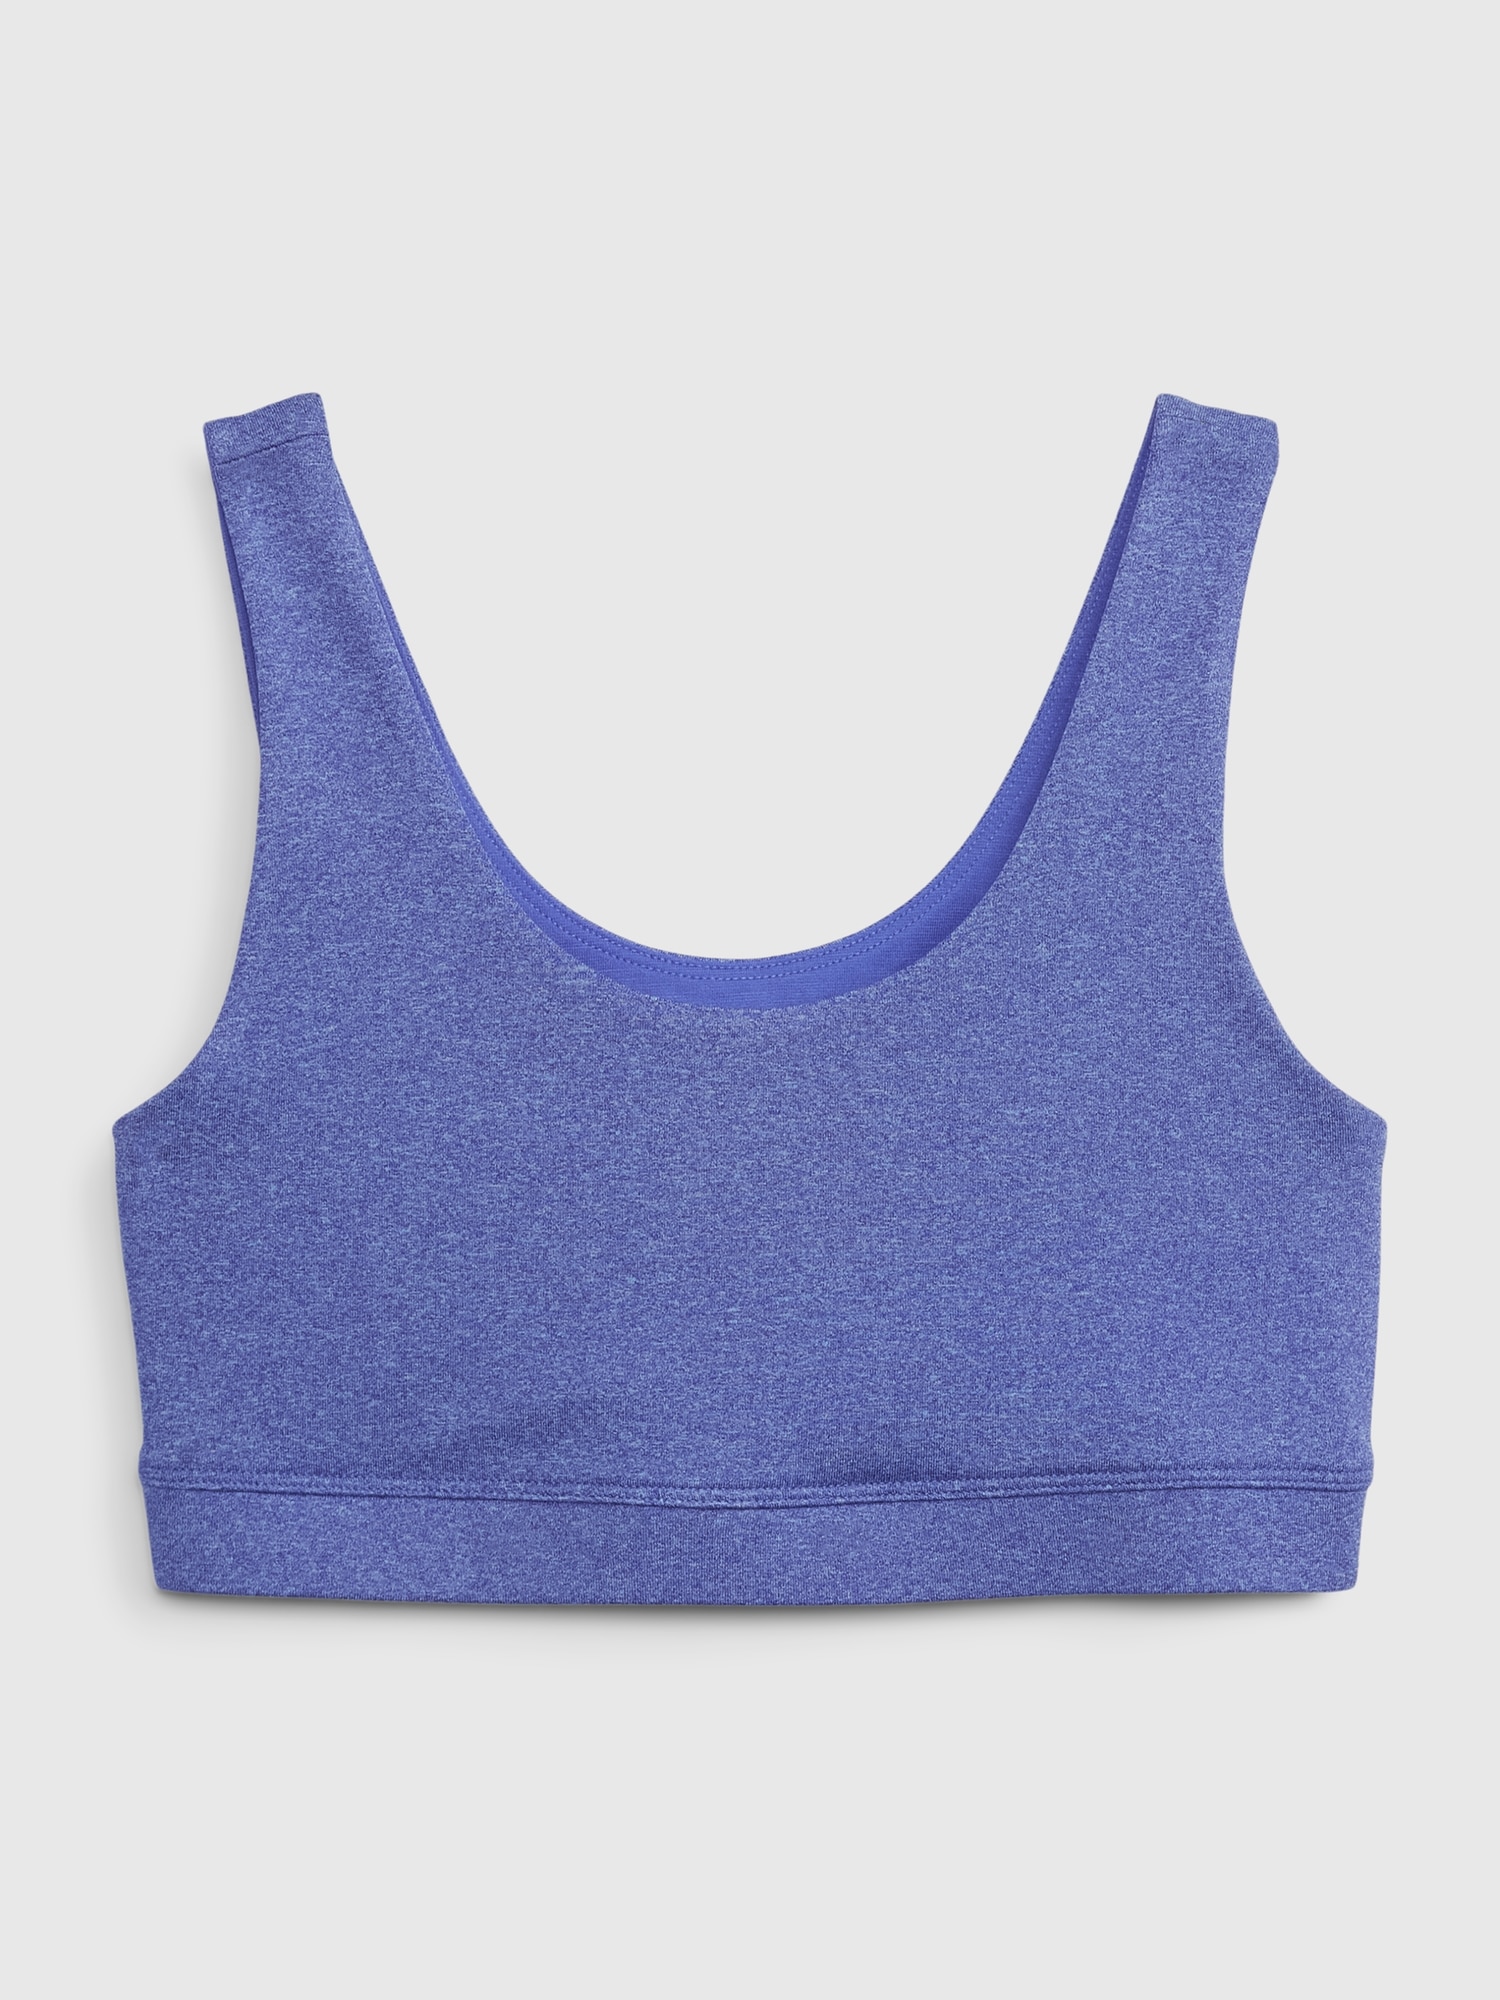 Sports Bra For Teenager - Buy Sports Bra For Teenager online at